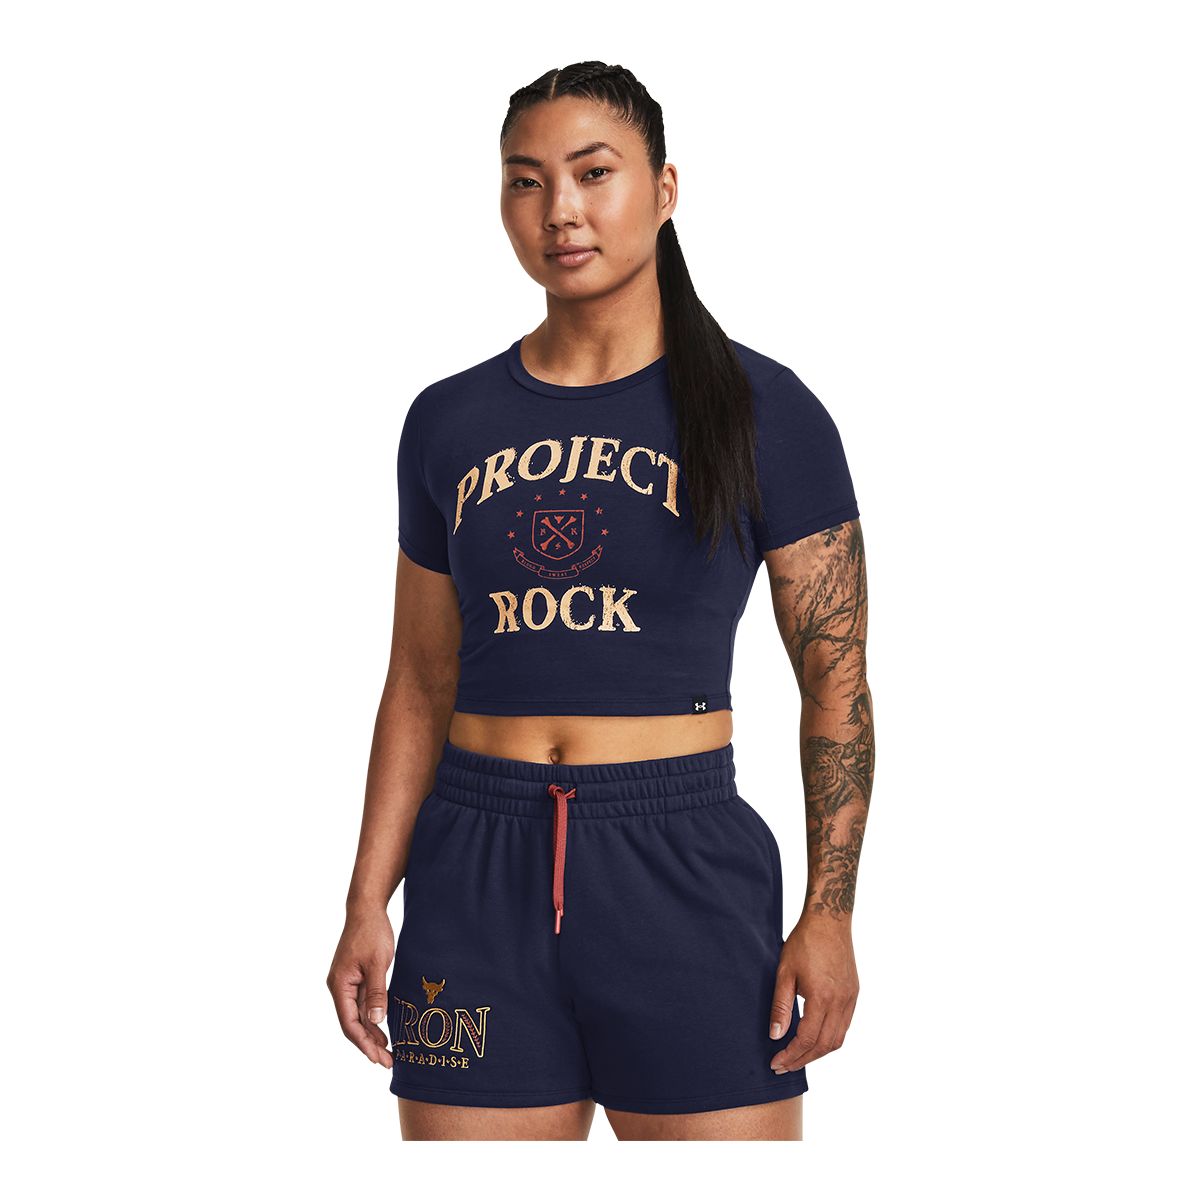 Image of Under Armour Women's Project Rock Arena Baby T Shirt